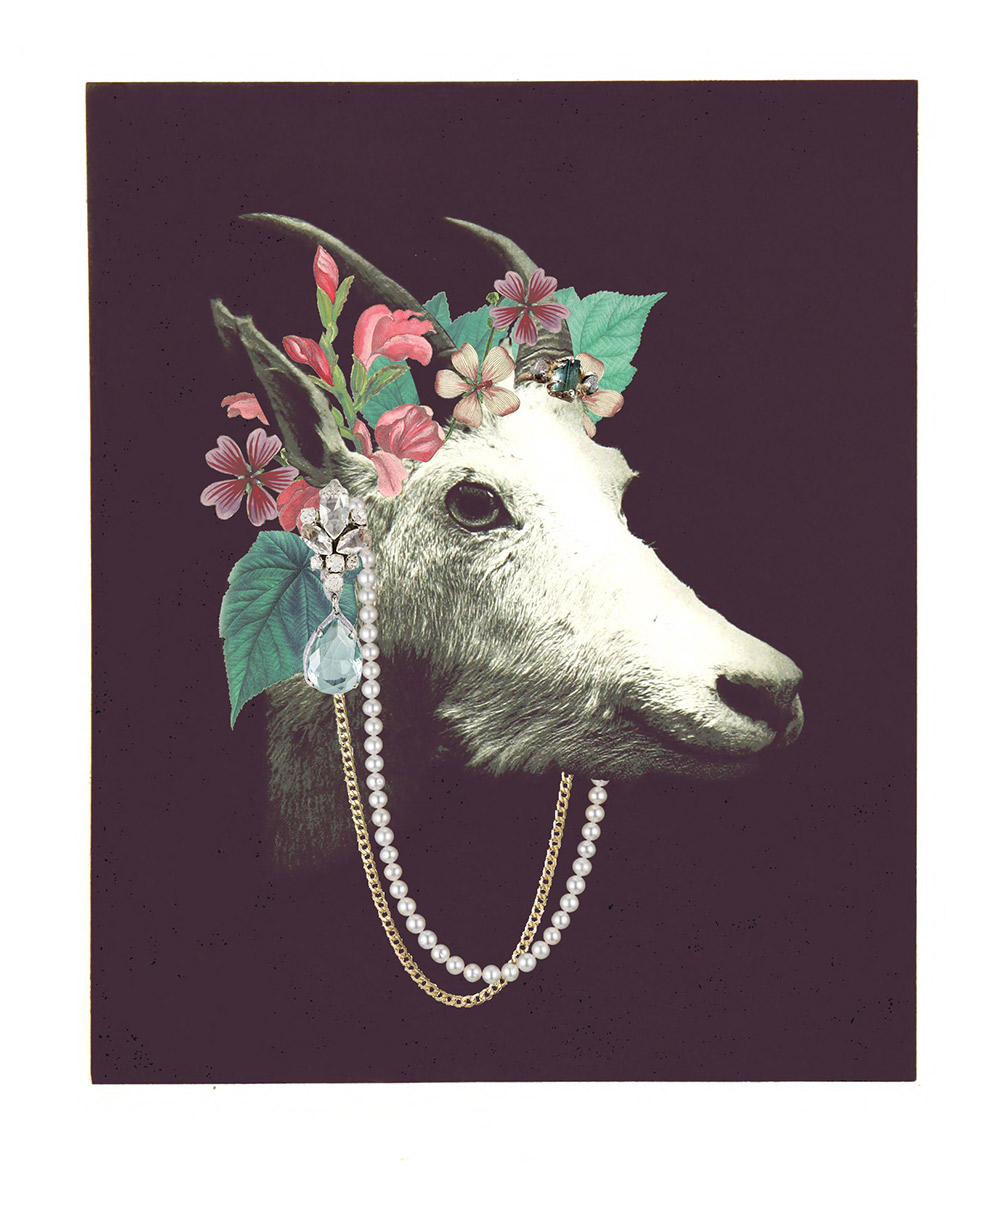 Party goat collage illustration